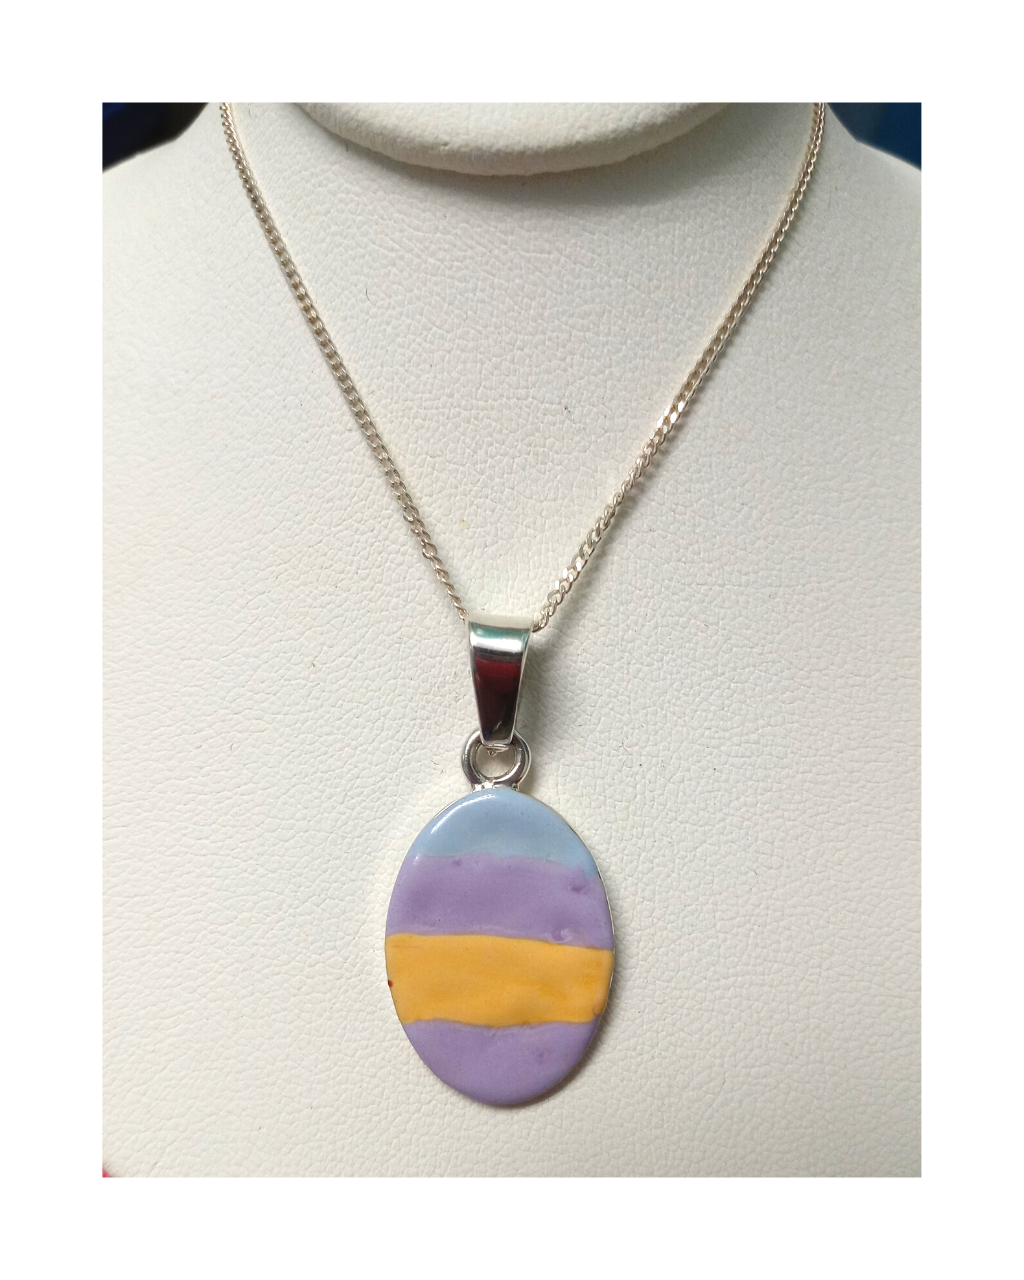 Exclusive Sterling Hand-enameled Wearable Art Oval Easter Egg Design with Polished Back for Engraving Removable Pendant on 16" Curb Chain